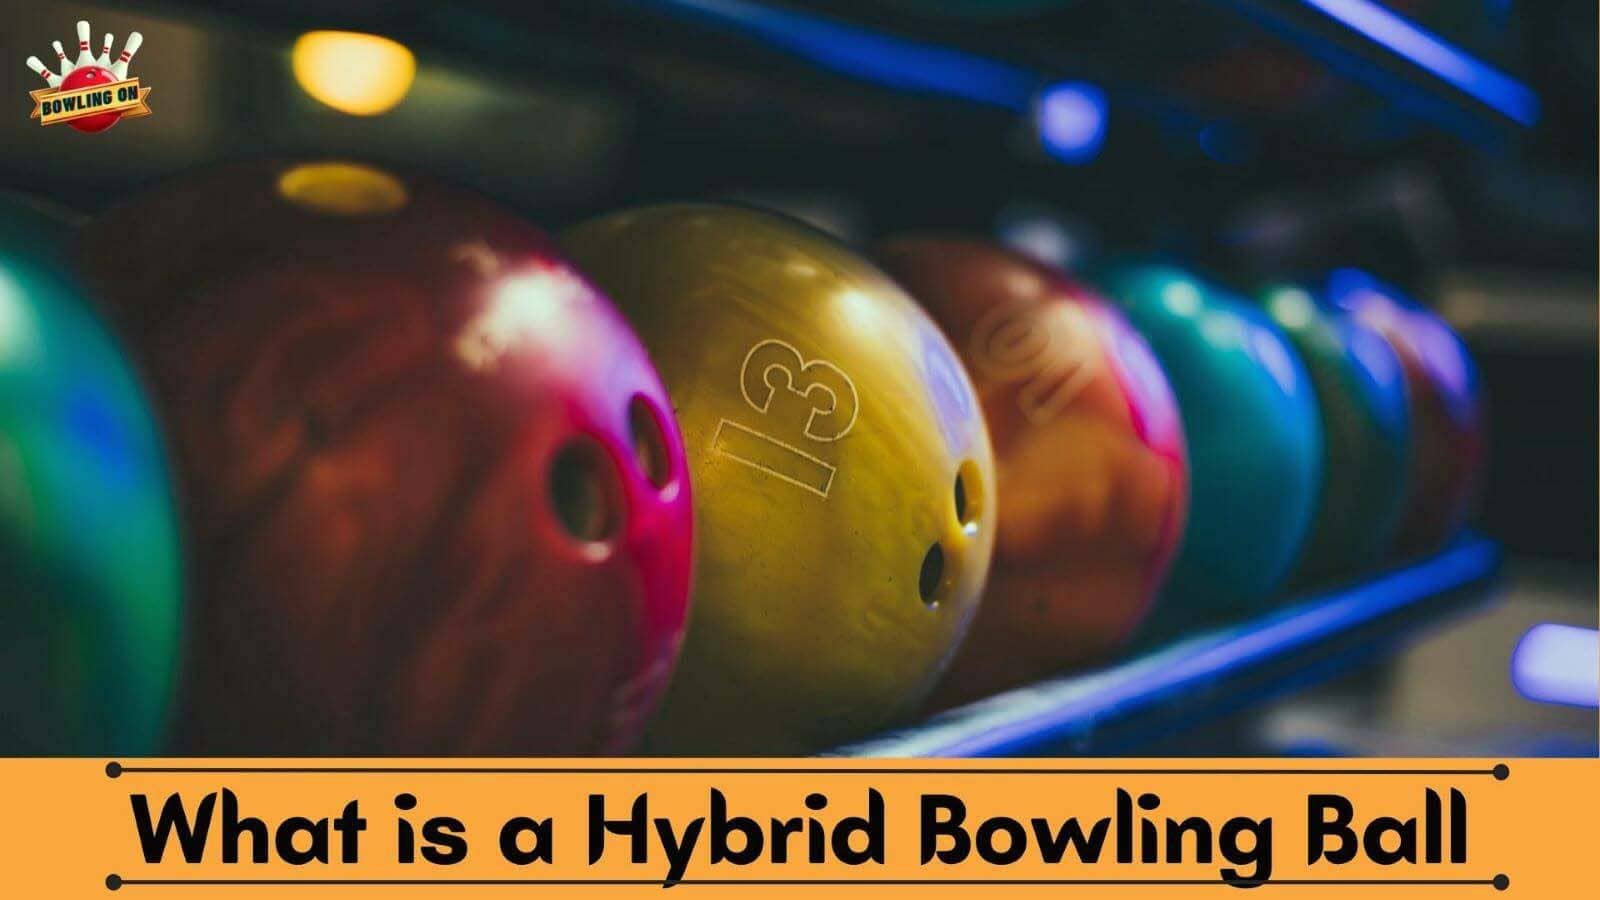 What is a Hybrid Bowling Ball